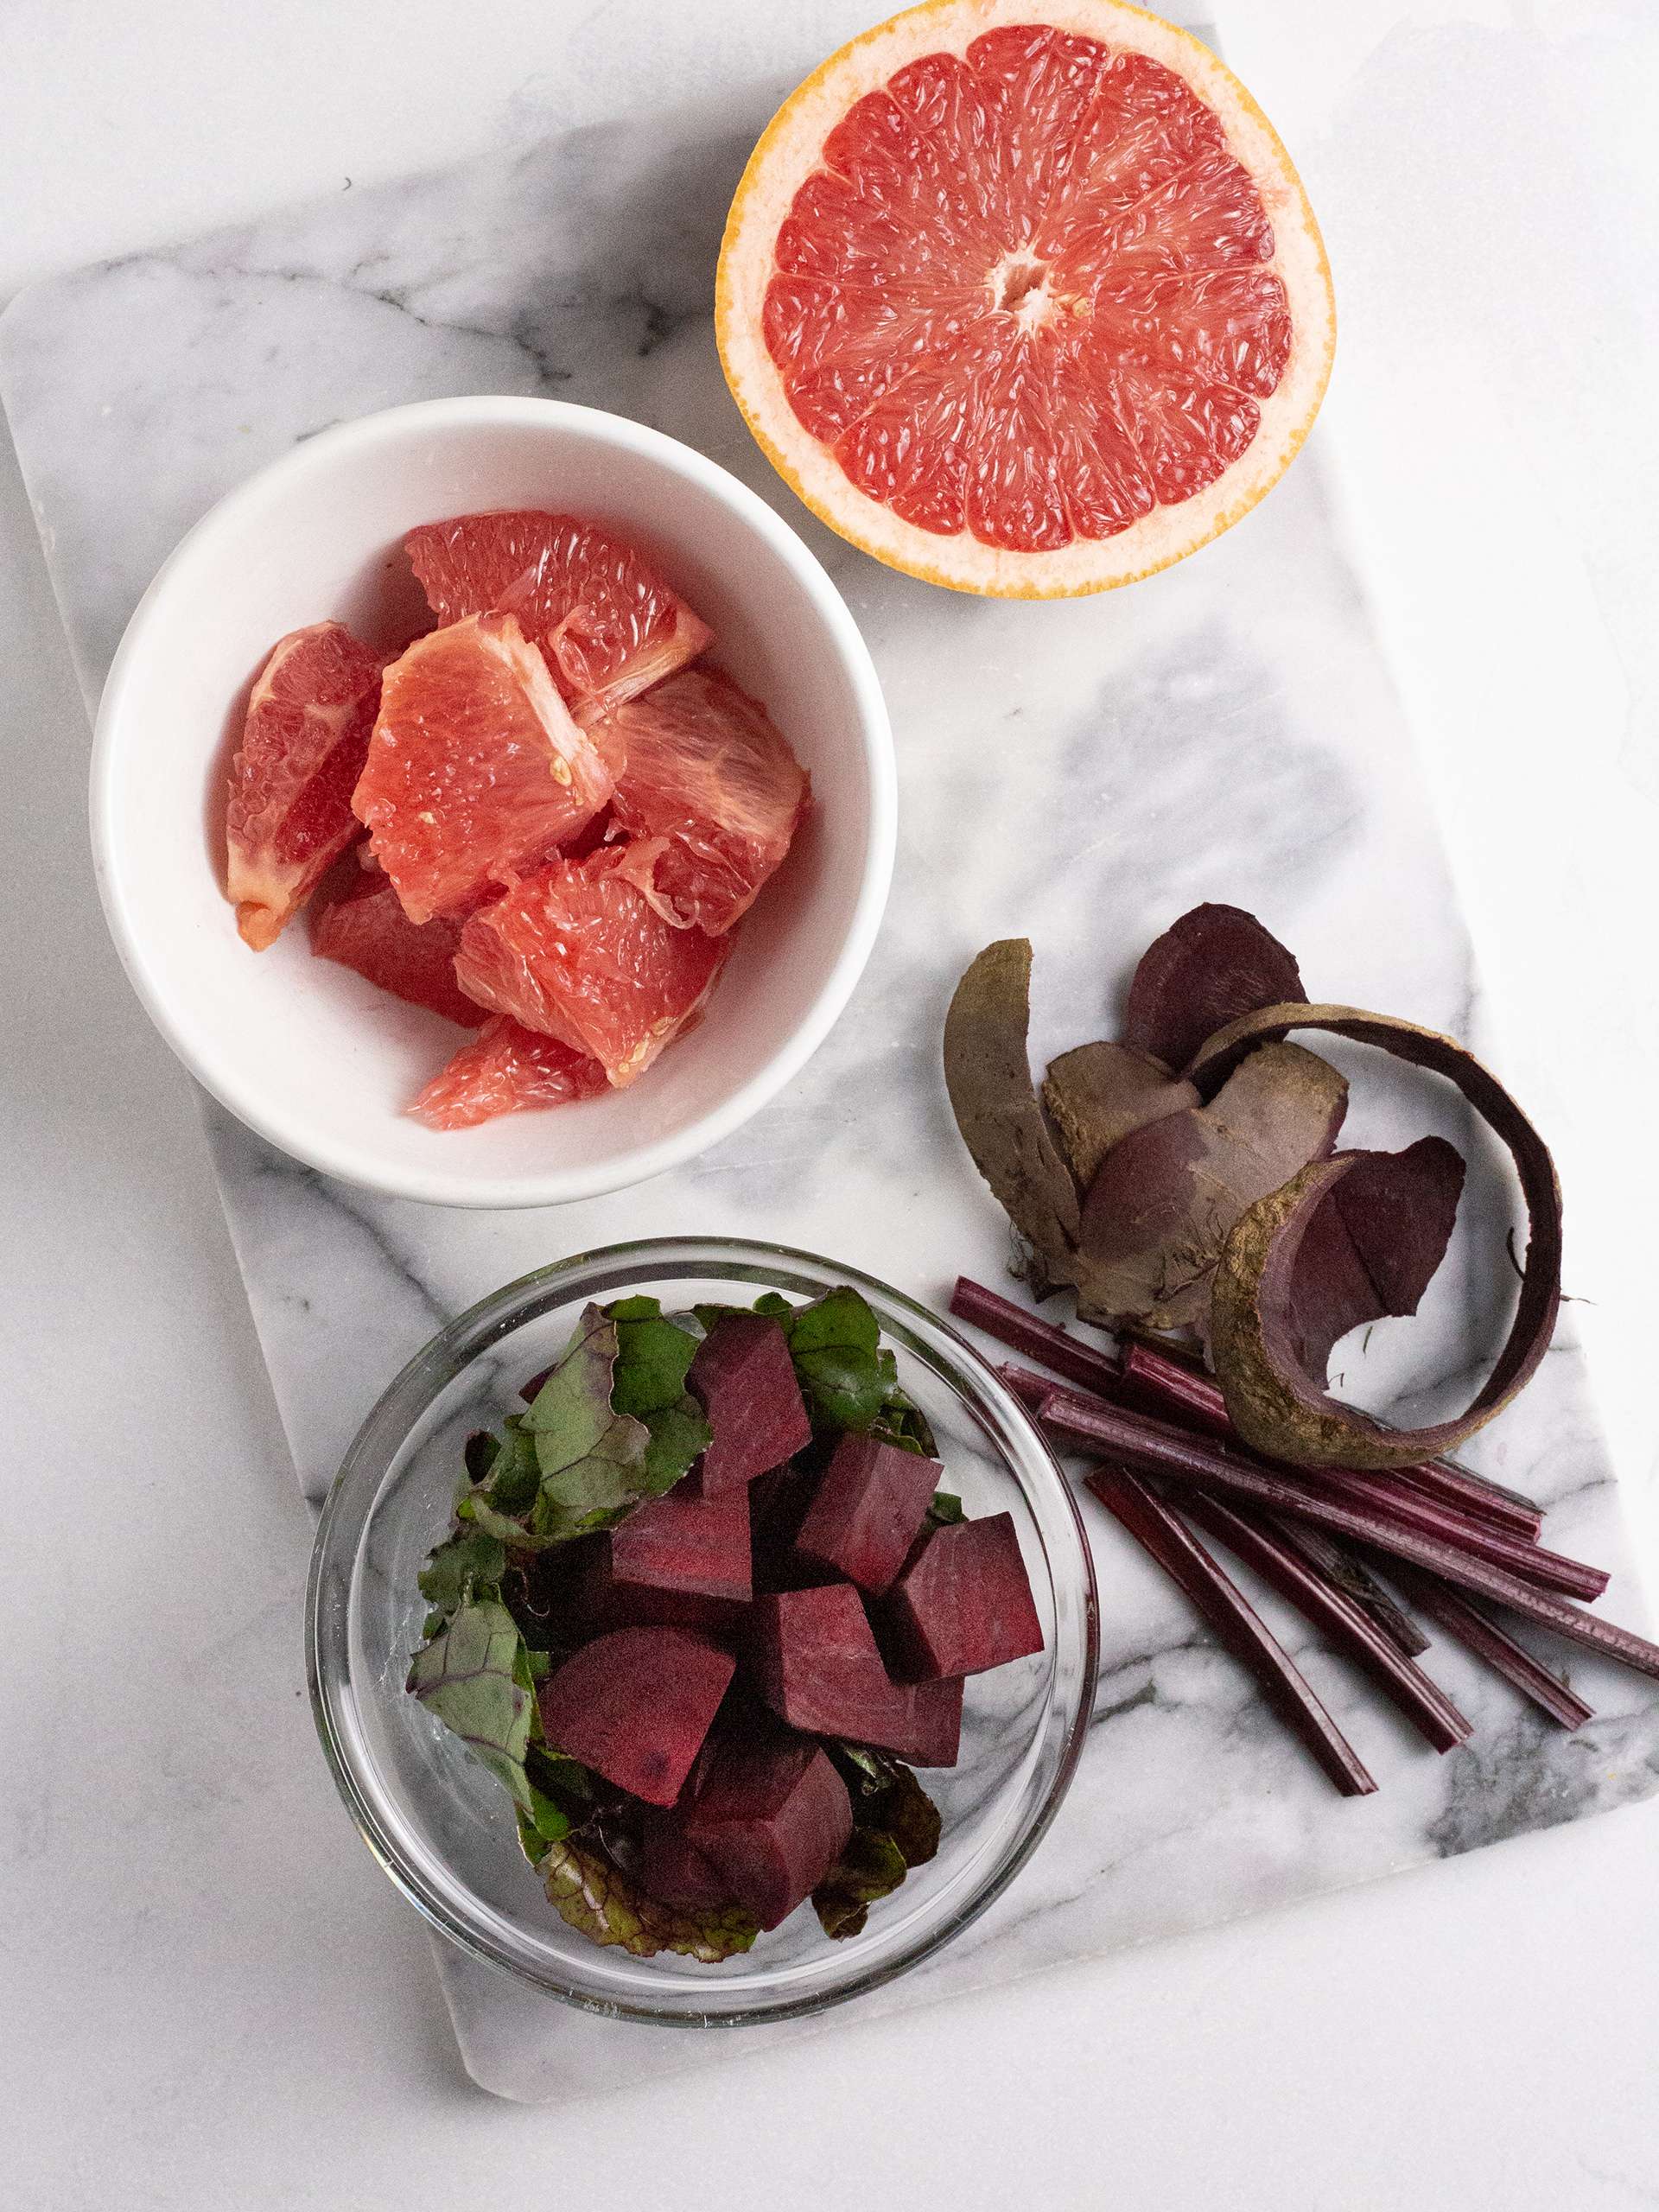 Peeled and sliced beets and grapefruit